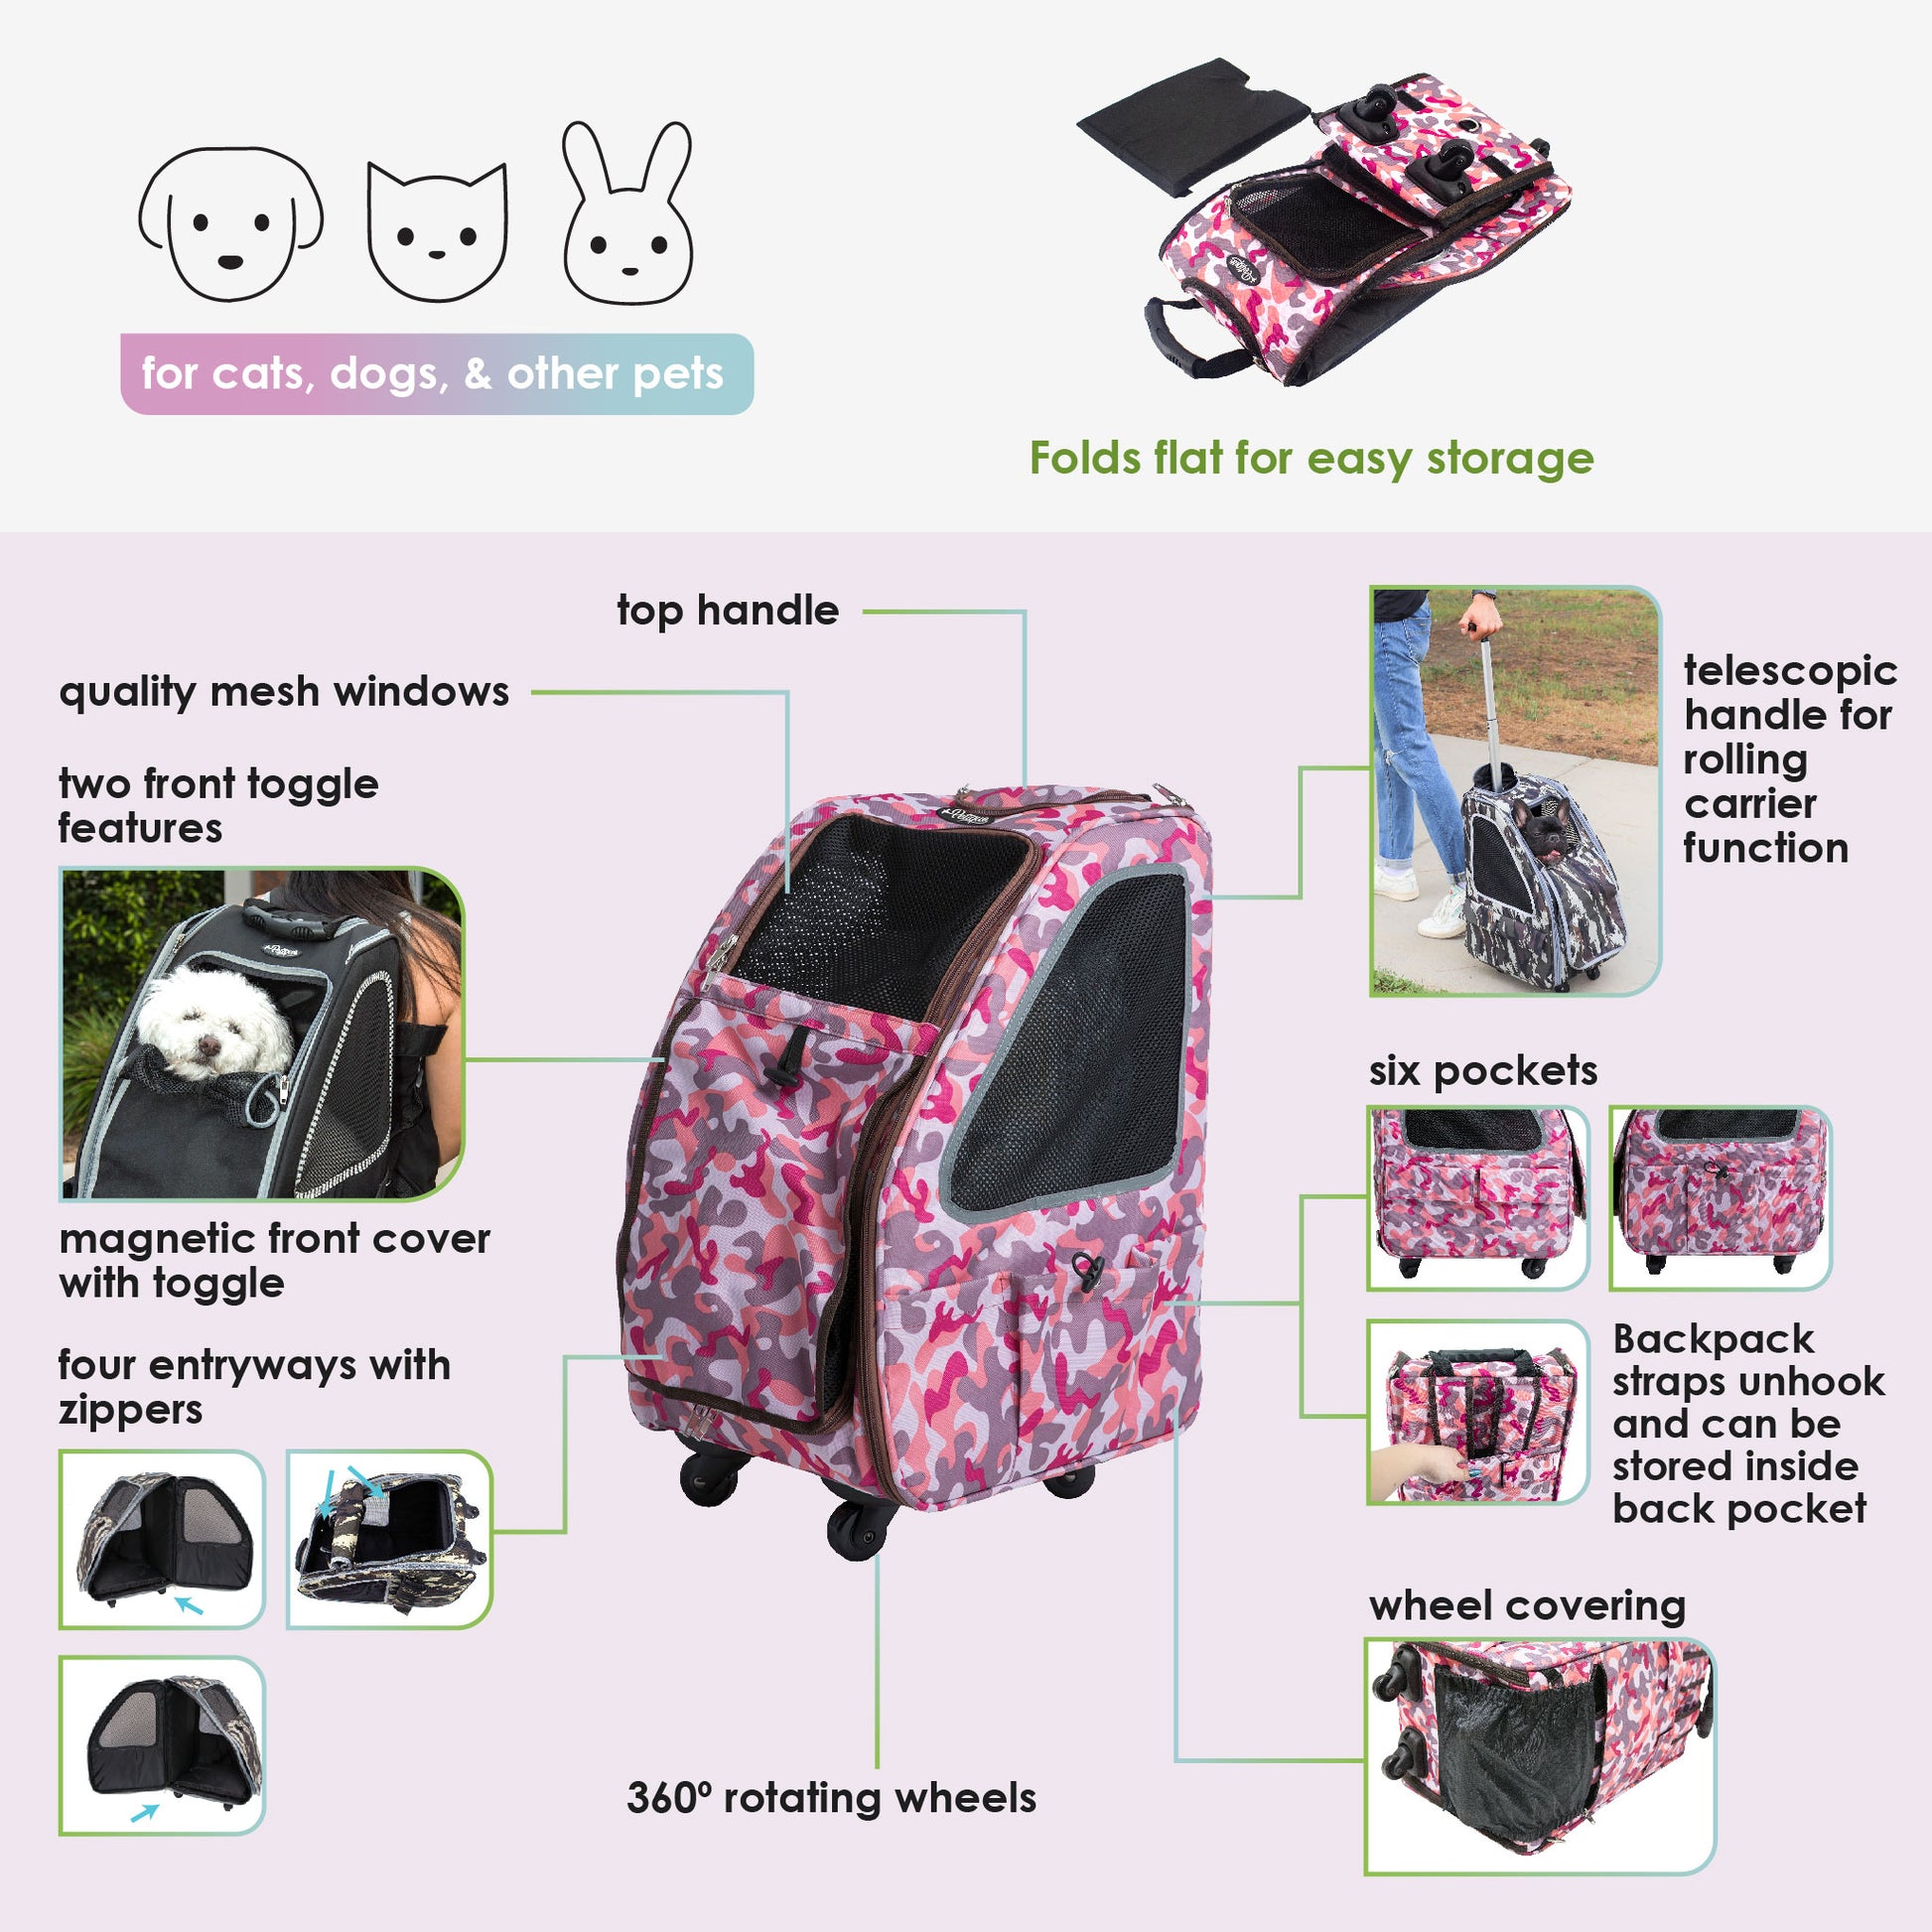 HITCH ScratchMe Pet Travel Carrier Soft Sided Portable Bag for Cats, Small  Dogs, Kittens or Puppies, Collapsible, Durable, Airline Approved, Carry